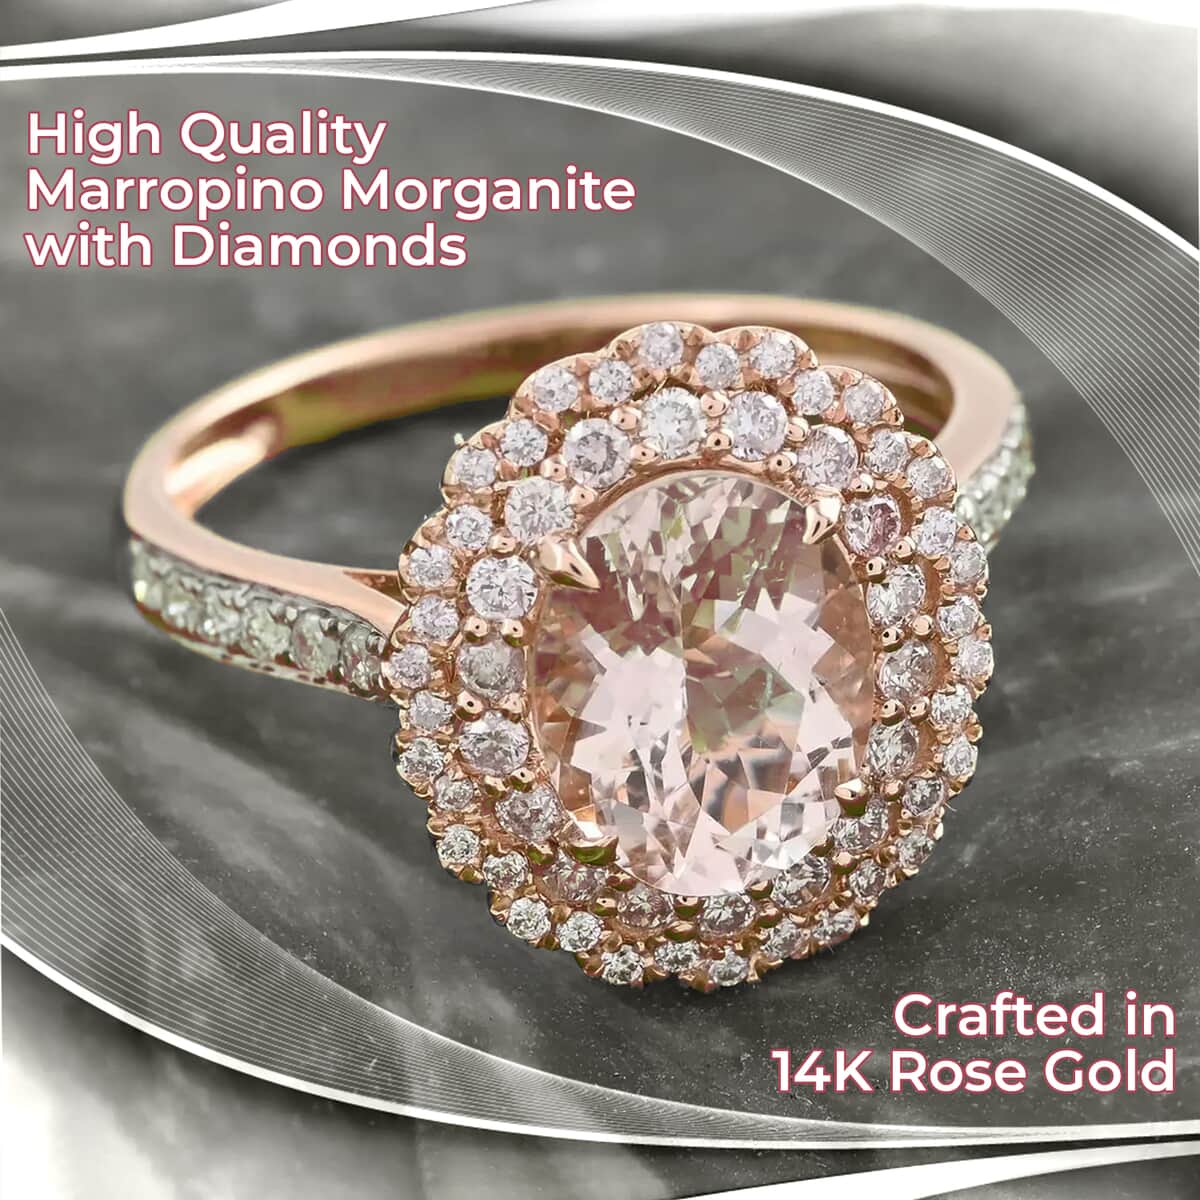 Ankur Treasure Chest Modani Marropino Morganite Ring, 14K Rose Gold Ring, Diamond Floral Halo Ring, Natural Pink And White Diamond Accent Ring, Promise Rings 1.95 ctw (Size 7.0) image number 1